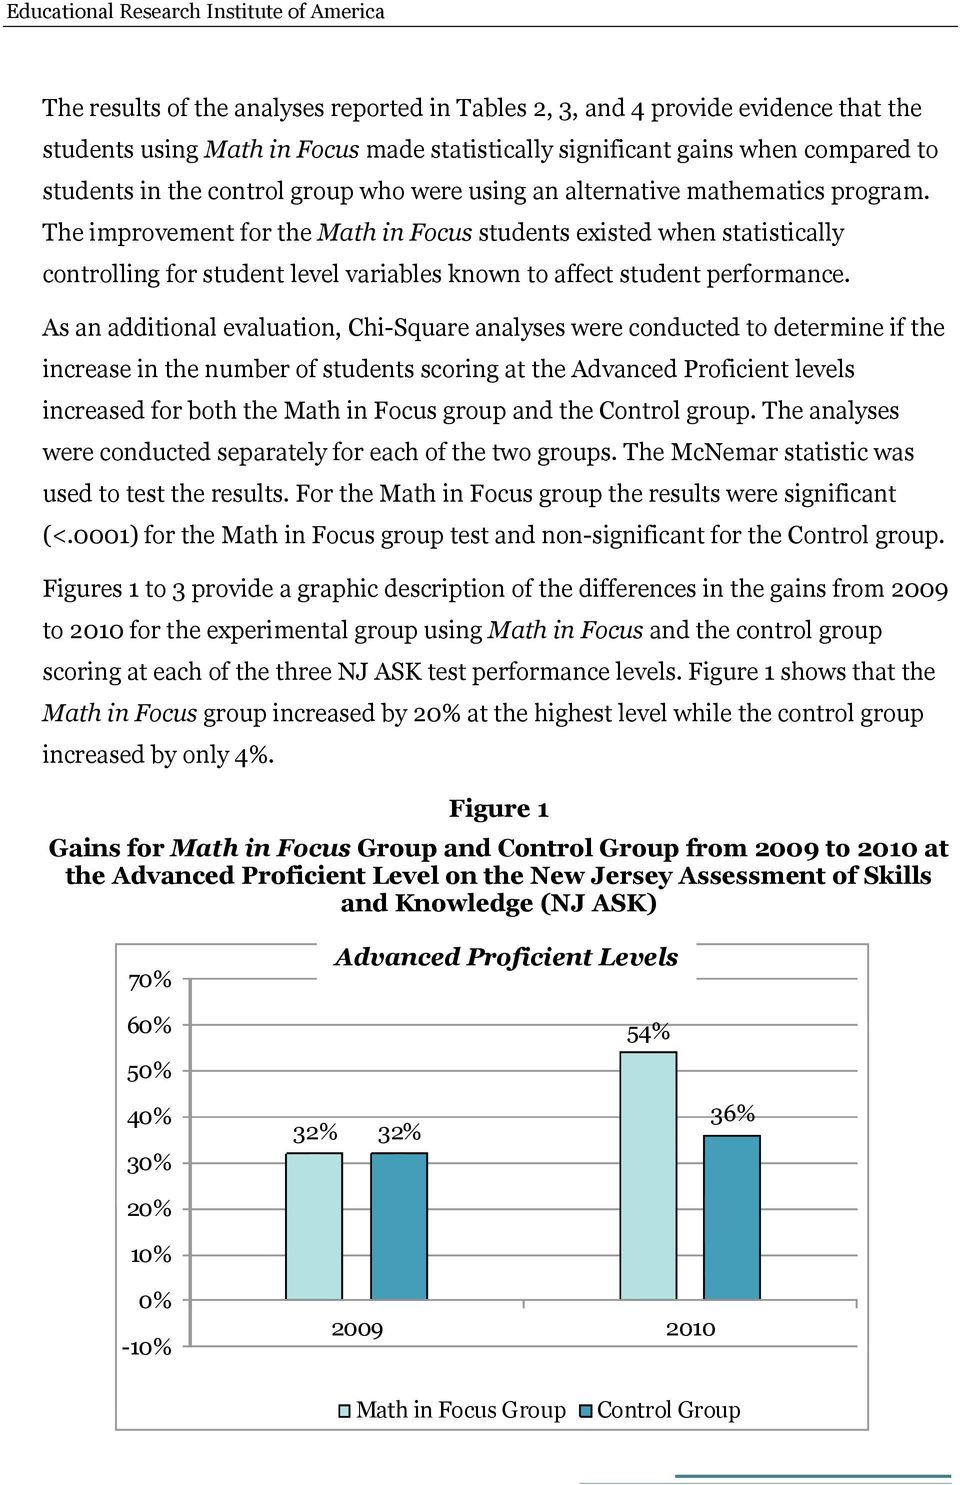 The improvement for the Math in Focus students existed when statistically controlling for student level variables known to affect student performance.